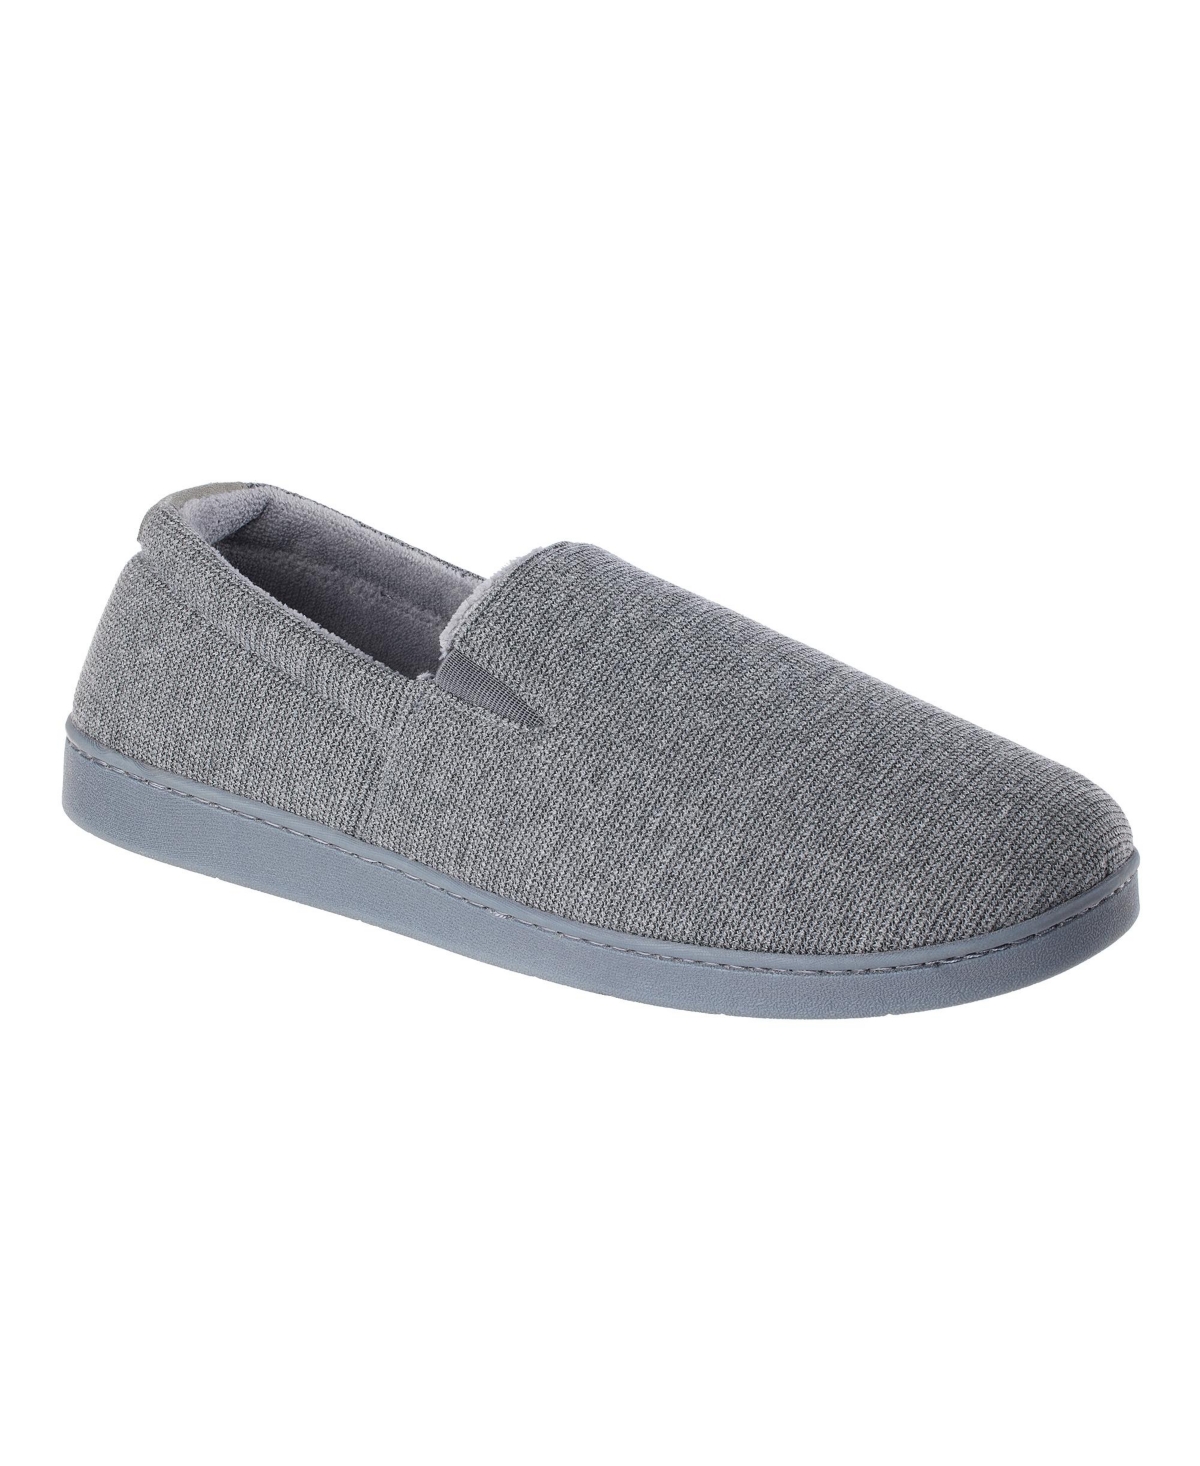 Men's Textured Knit Kai Closed Back Slippers with Gel-Infused Memory Foam - Dark Charcoal Heather